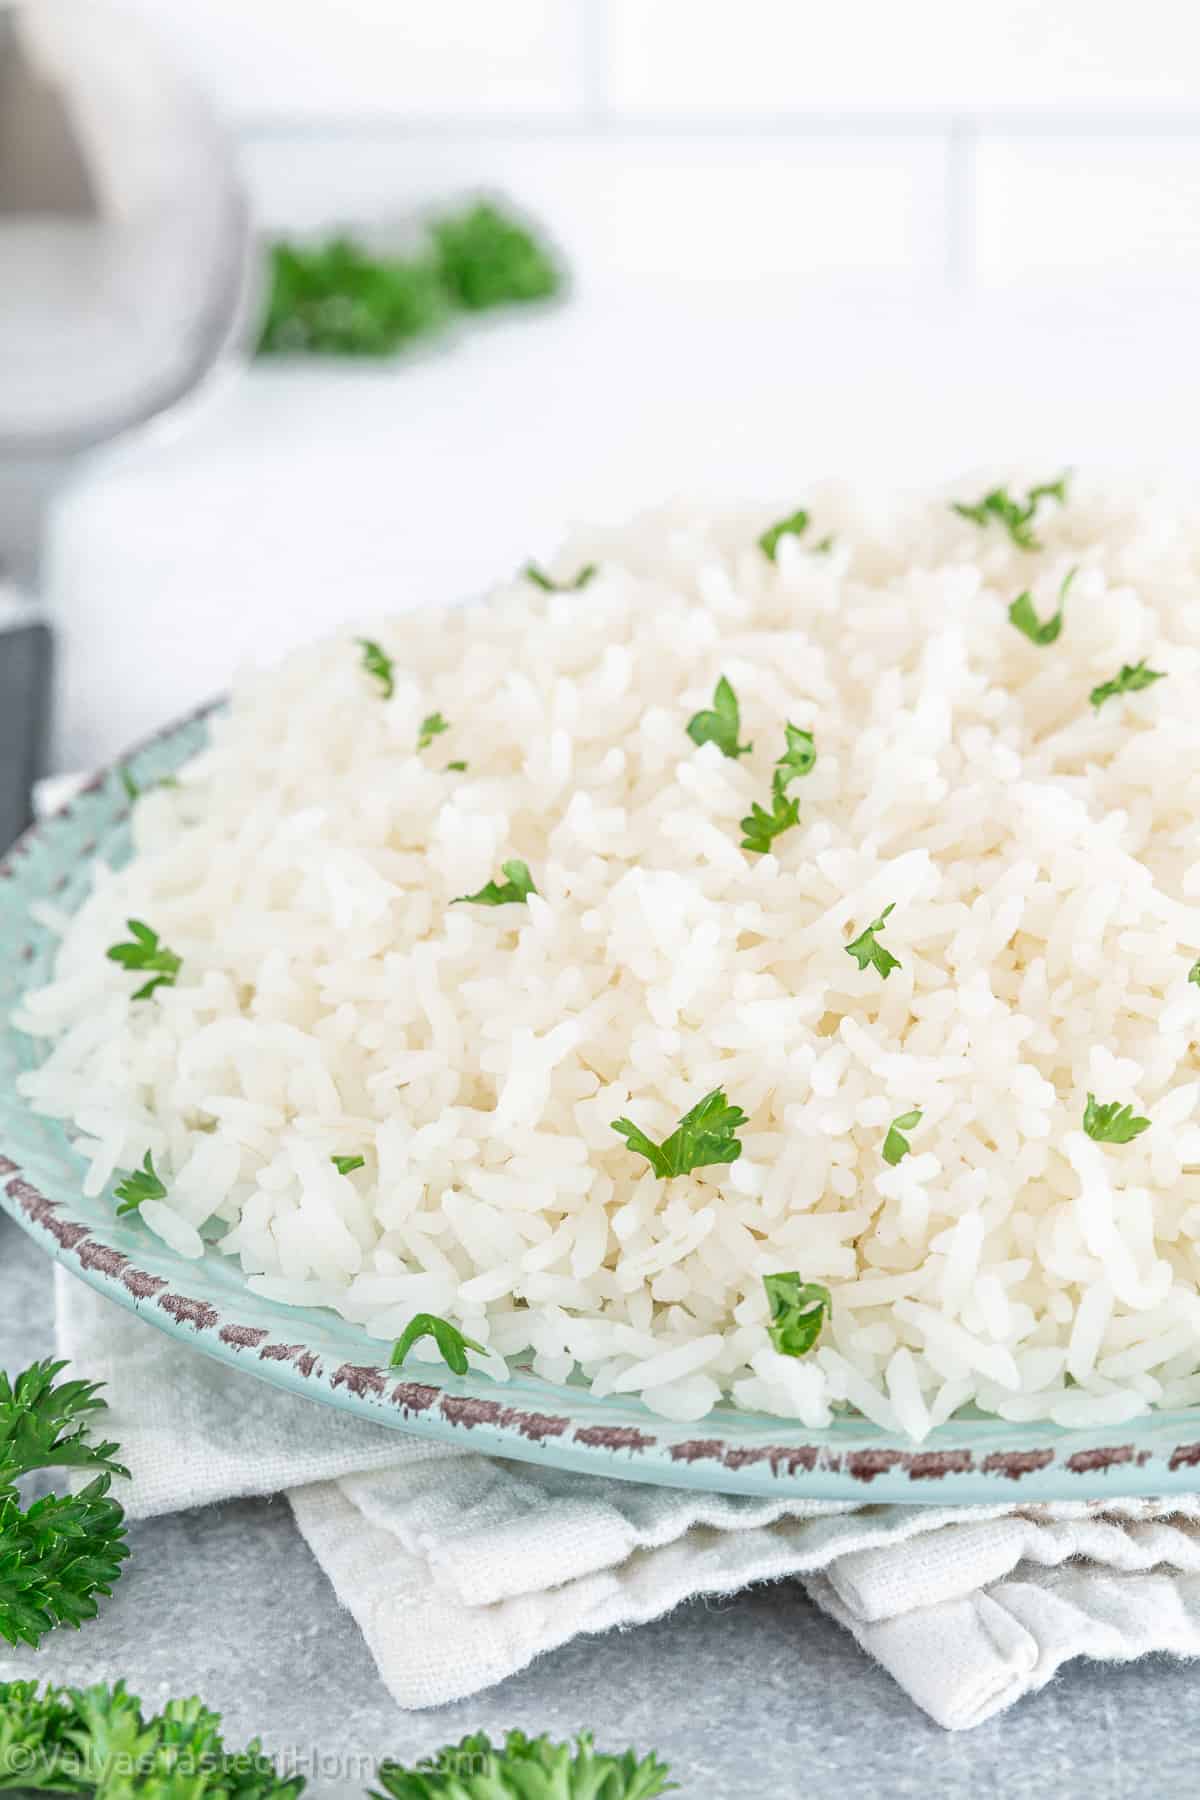 Rice cooked on a stovetop in a pot or saucepan is referred to as stovetop rice. The rice is simmered in a measured amount of water or broth until it absorbs all of the liquid and becomes soft.